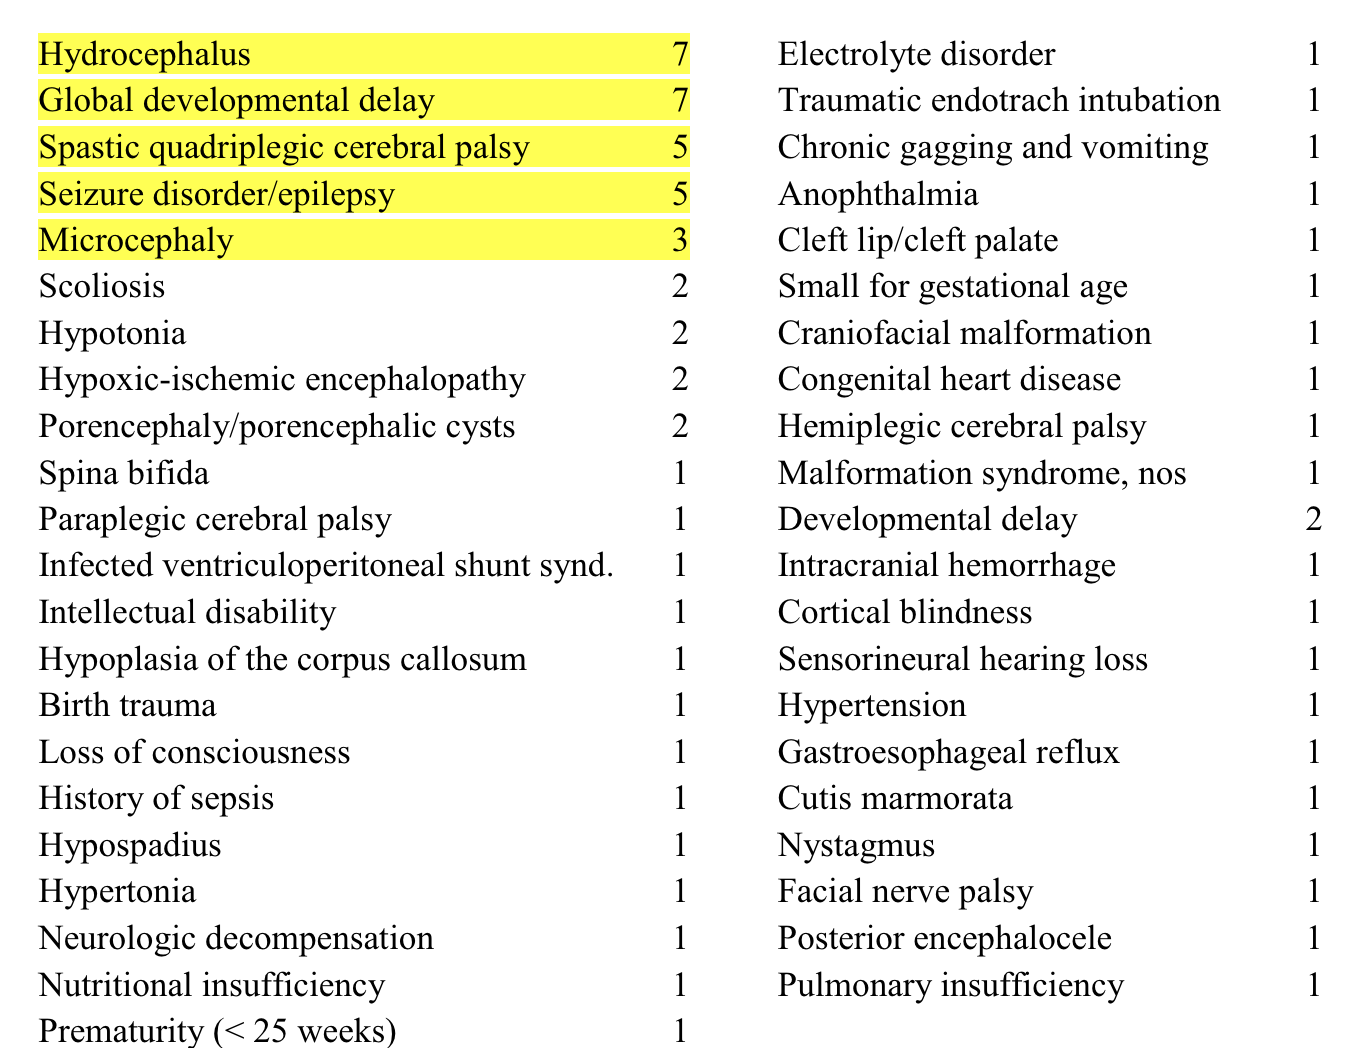 Table 3. Primary Diagnoses in descending order of frequency